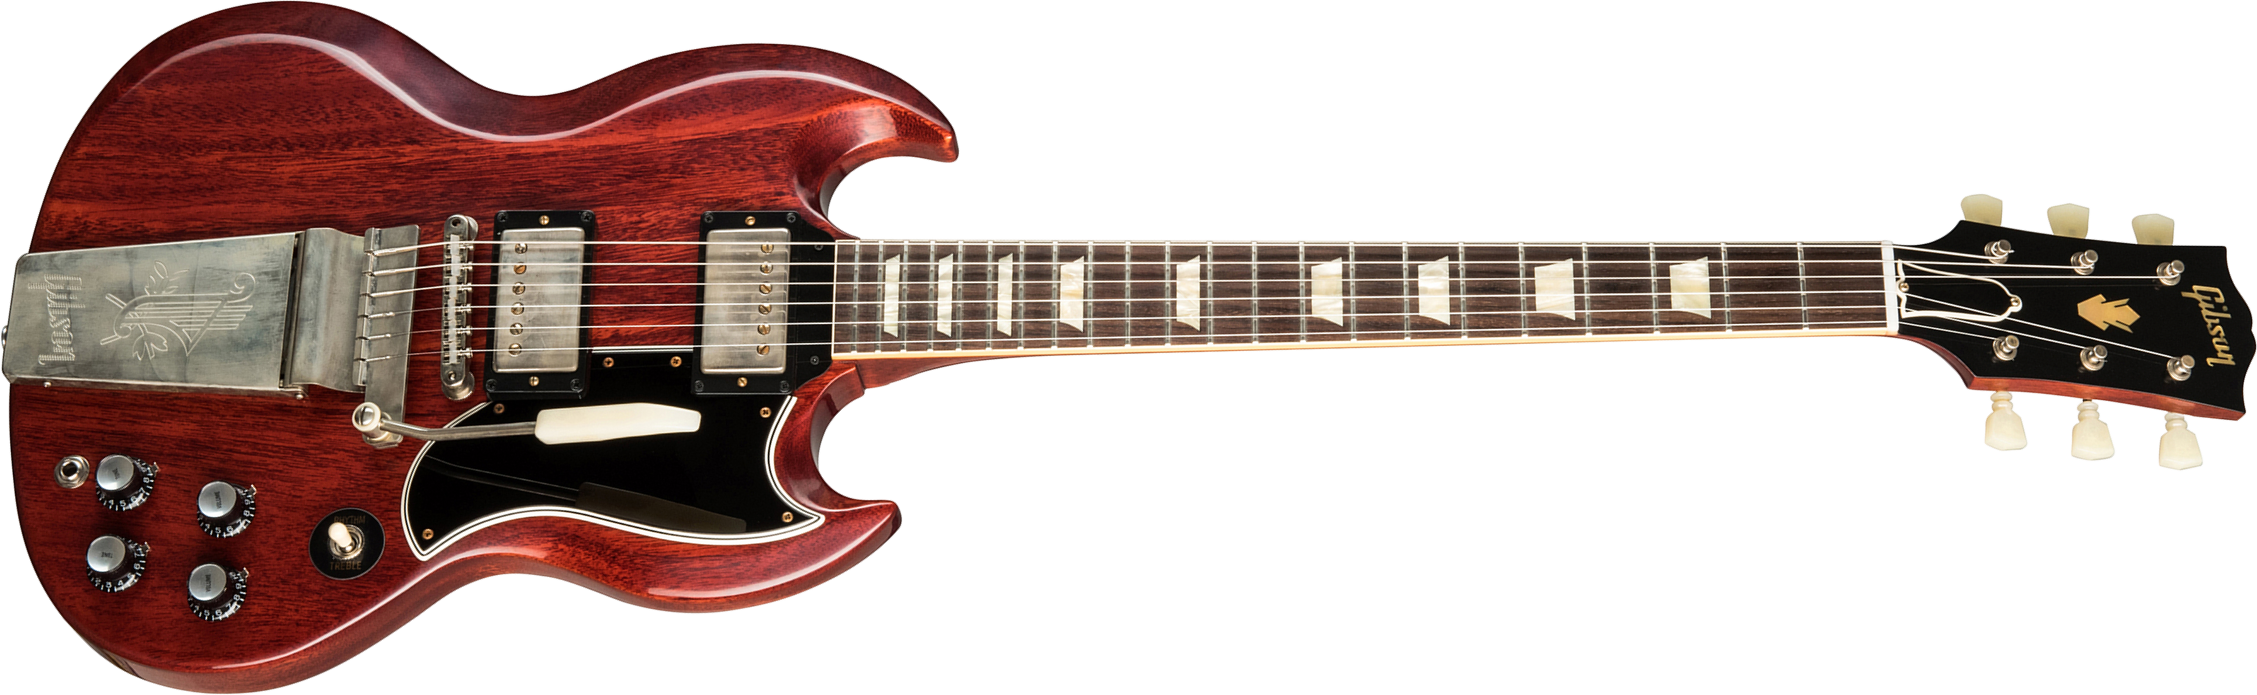 Gibson Custom Shop Sg Standard 1964 Reissue Maestro Vibrola 2019 2h Trem Rw - Vos Cherry Red - Double cut electric guitar - Main picture